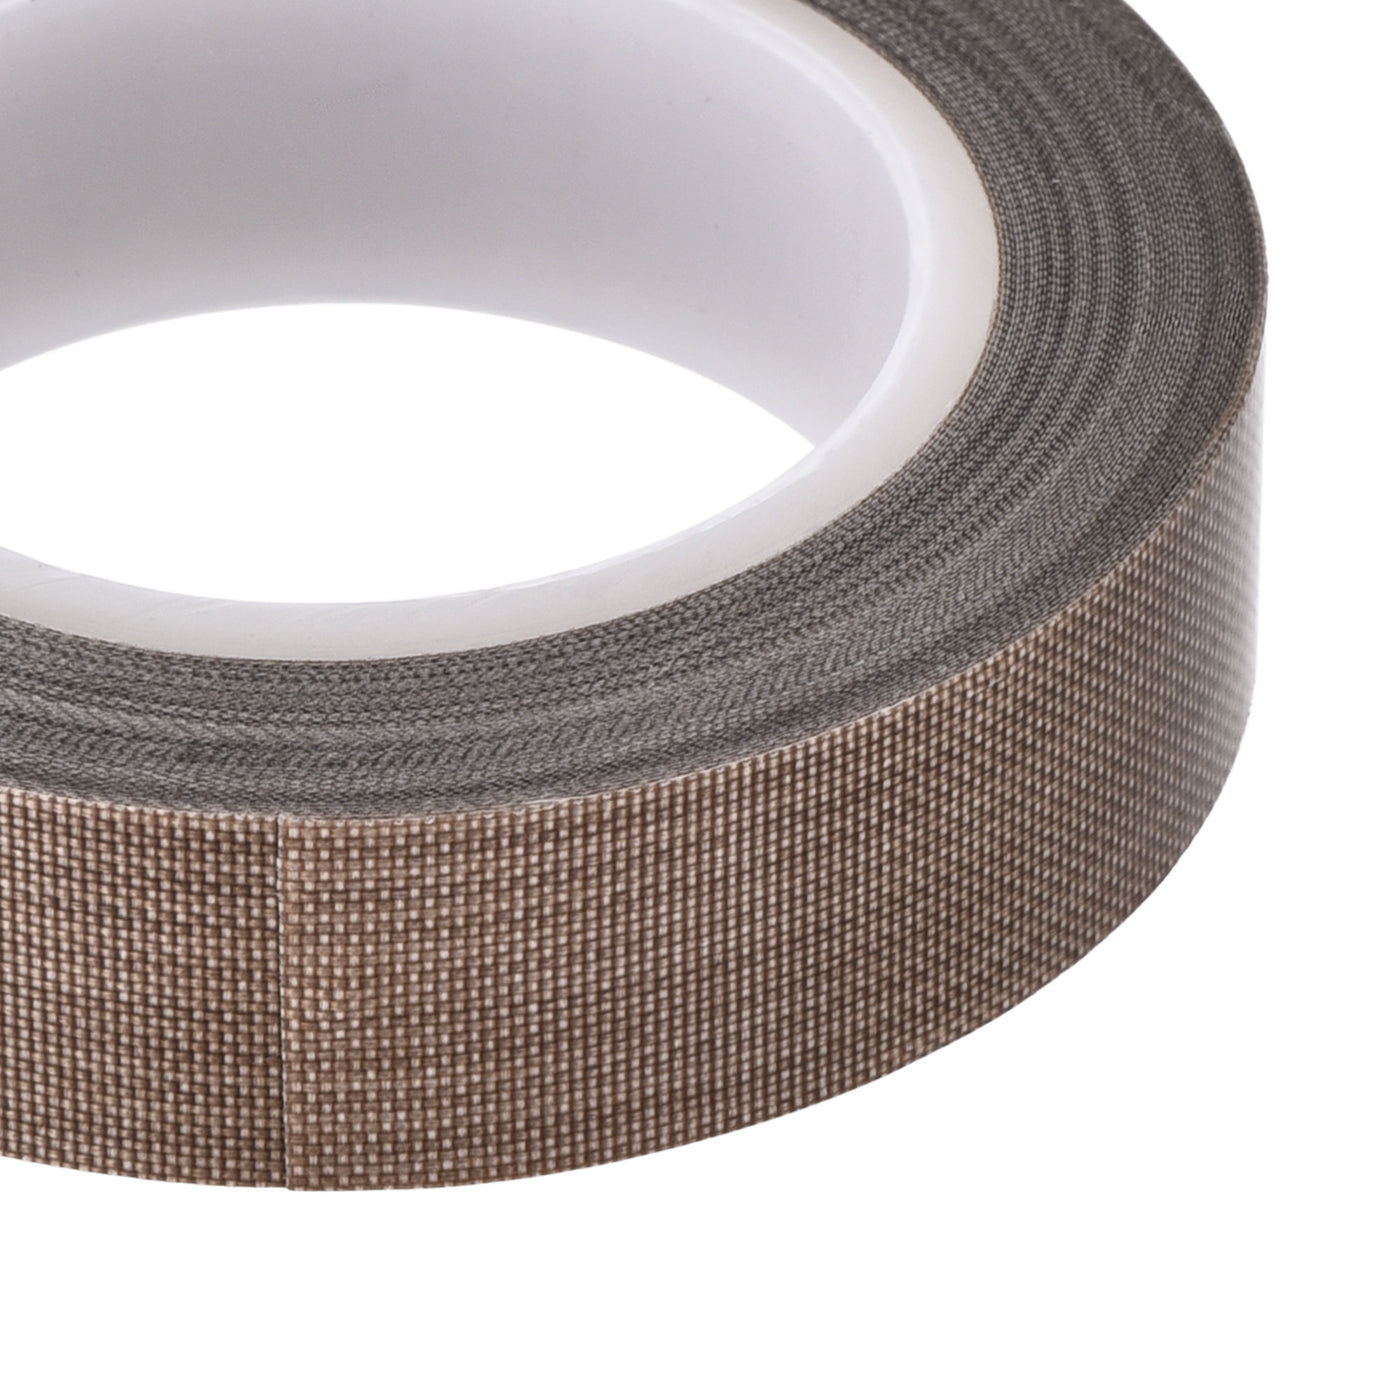 uxcell Uxcell Heat Resistant Tape High Temperature Tape PTFE Film Adhesive Tape 15mm Width 10m 33ft Length Brown